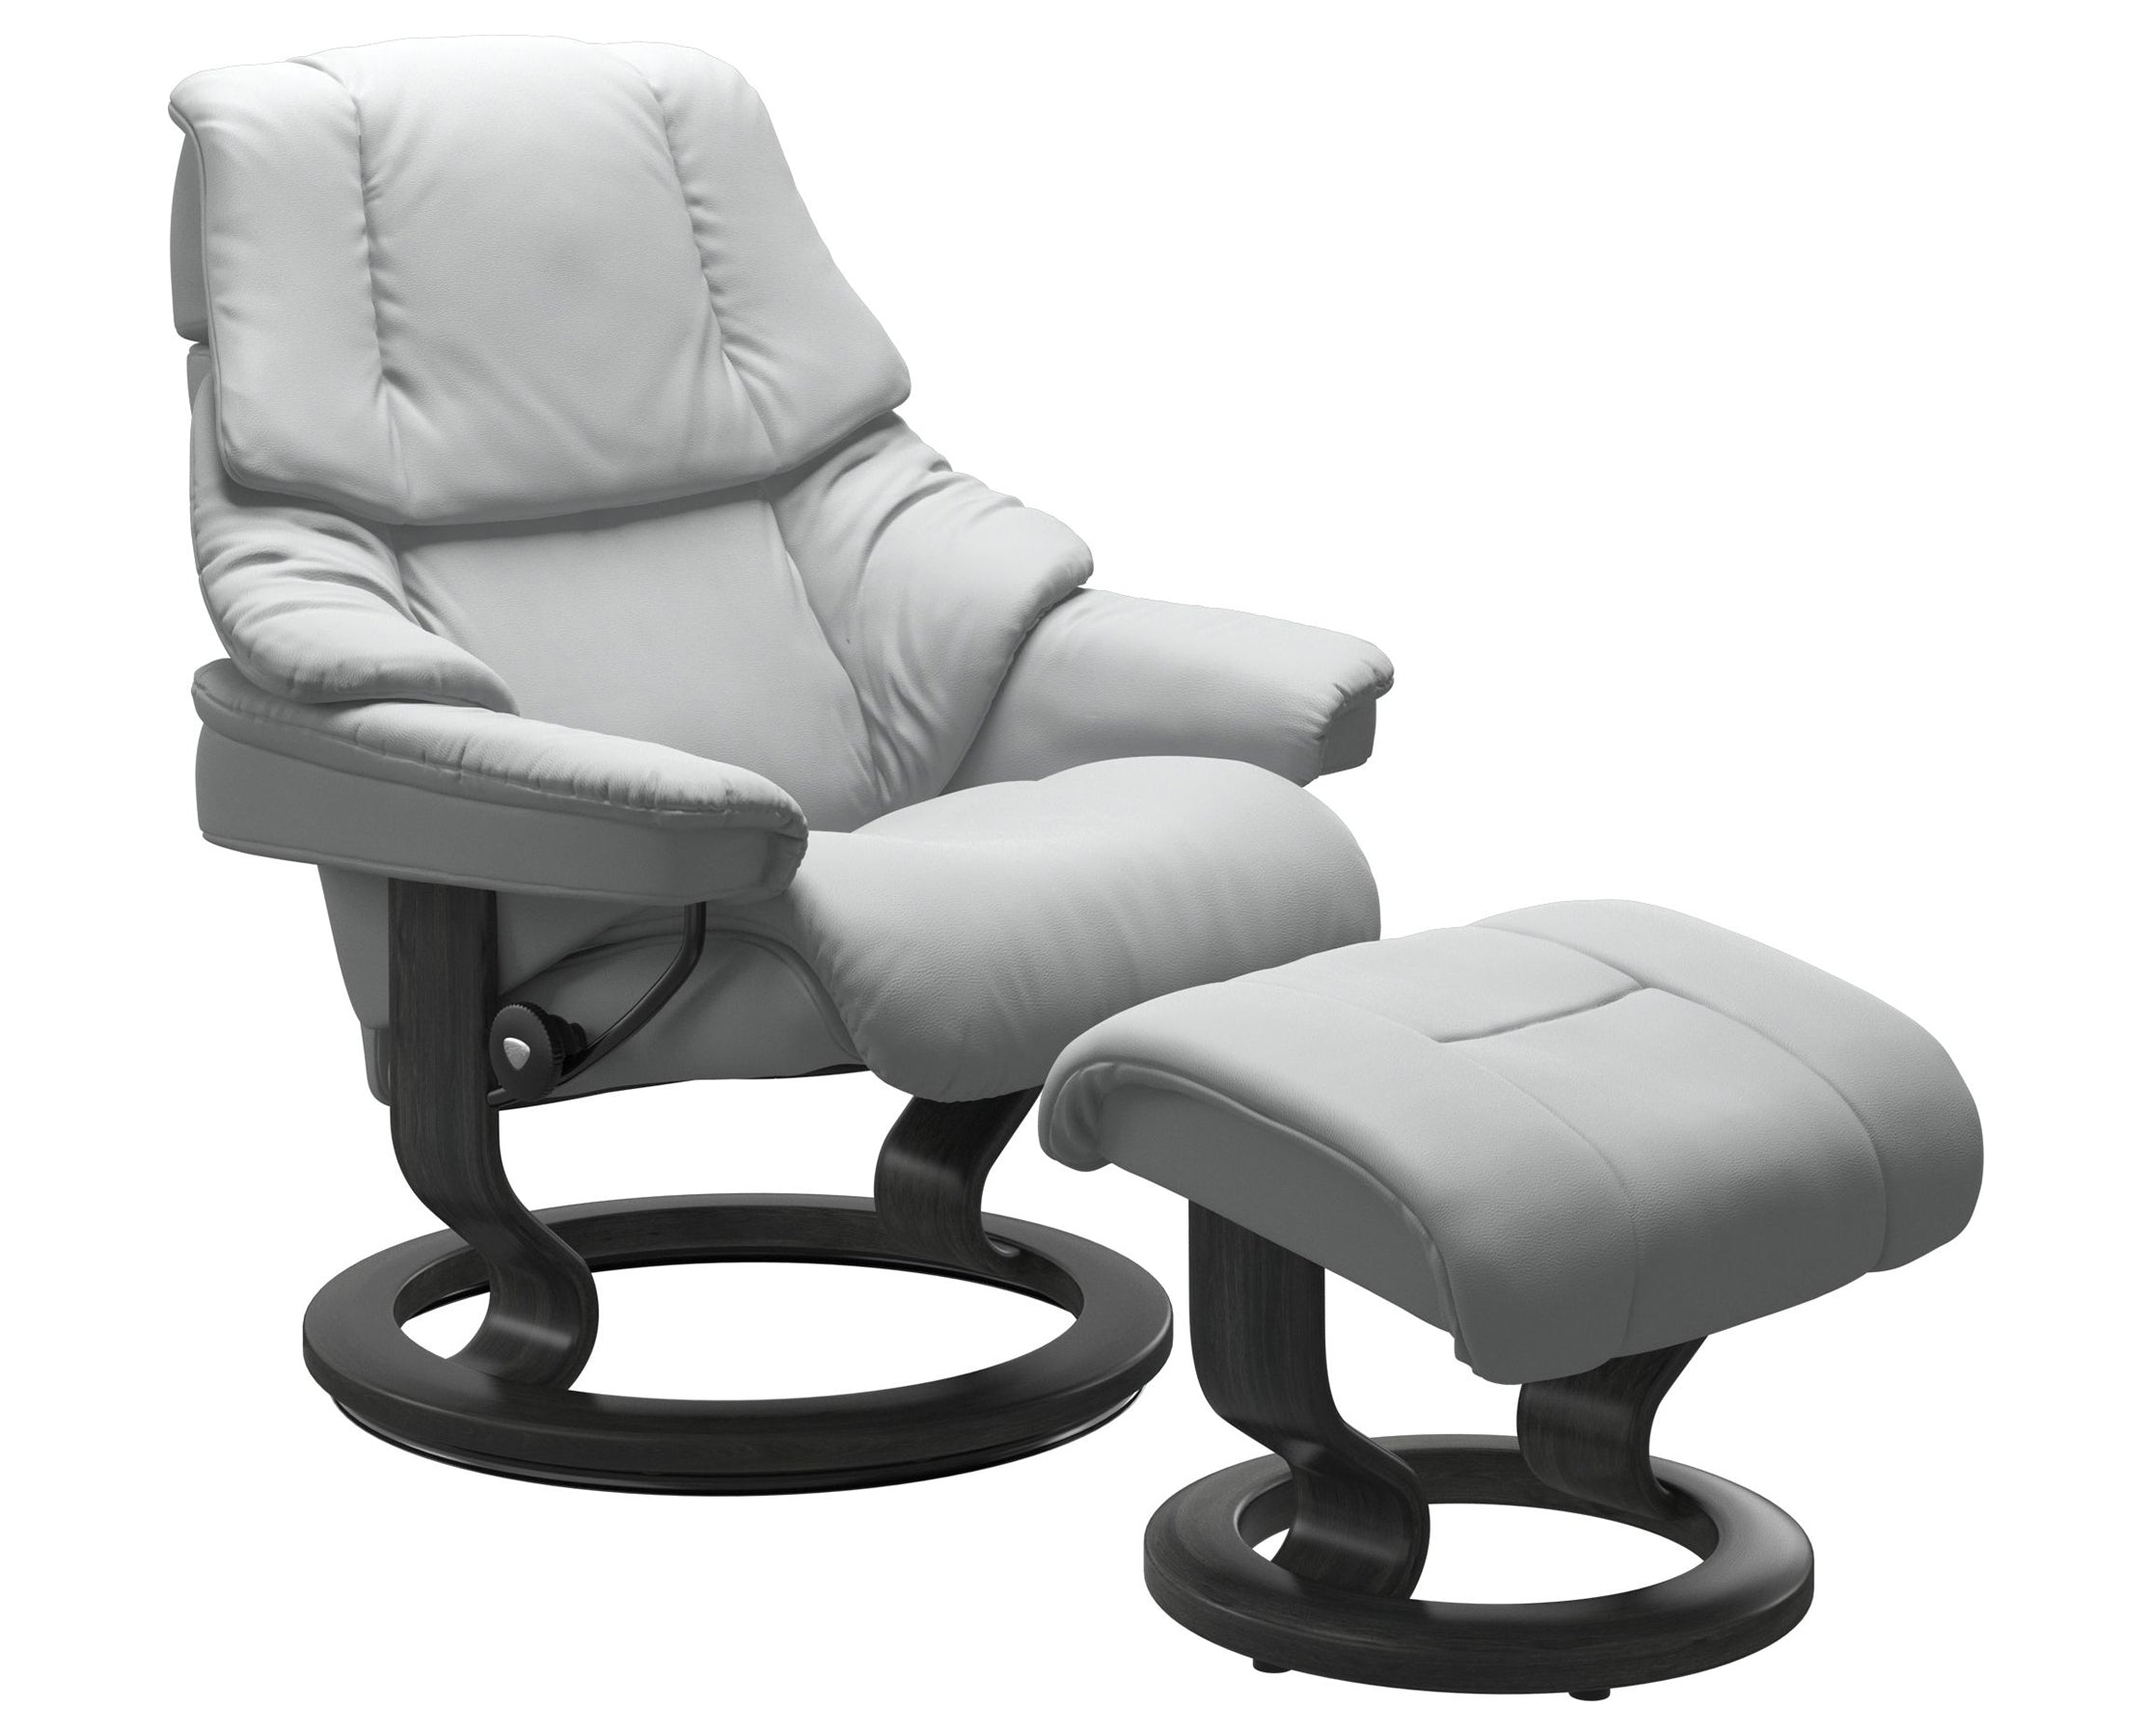 Paloma Leather Misty Grey S/M/L and Grey Base | Stressless Reno Classic Recliner | Valley Ridge Furniture